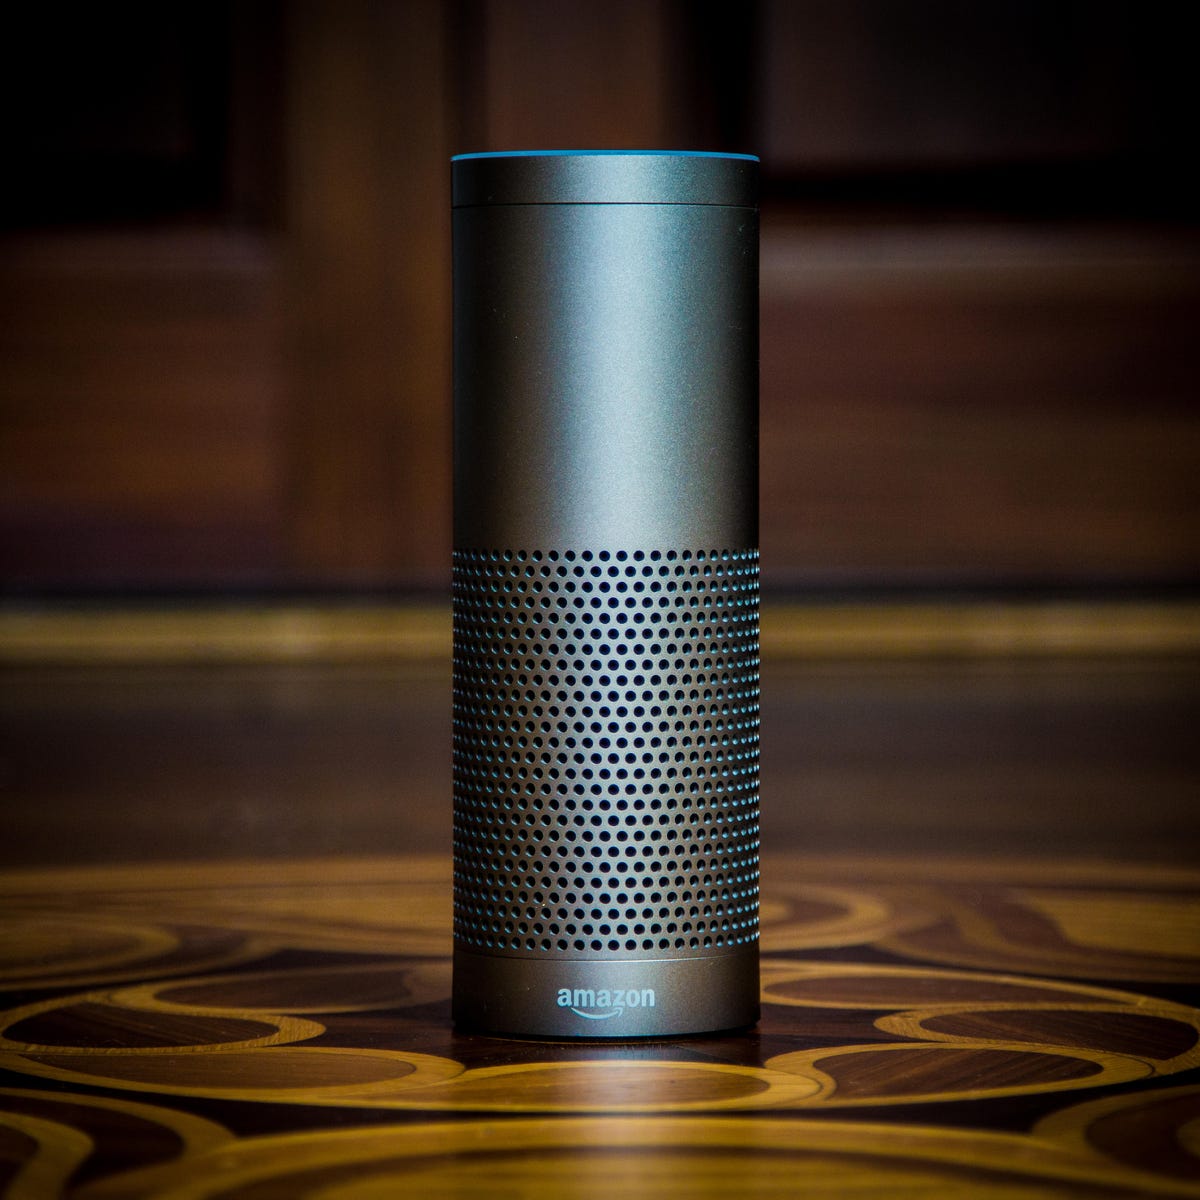 necessary Cornwall Gather Amazon Echo Plus review: It doesn't quite add up - CNET